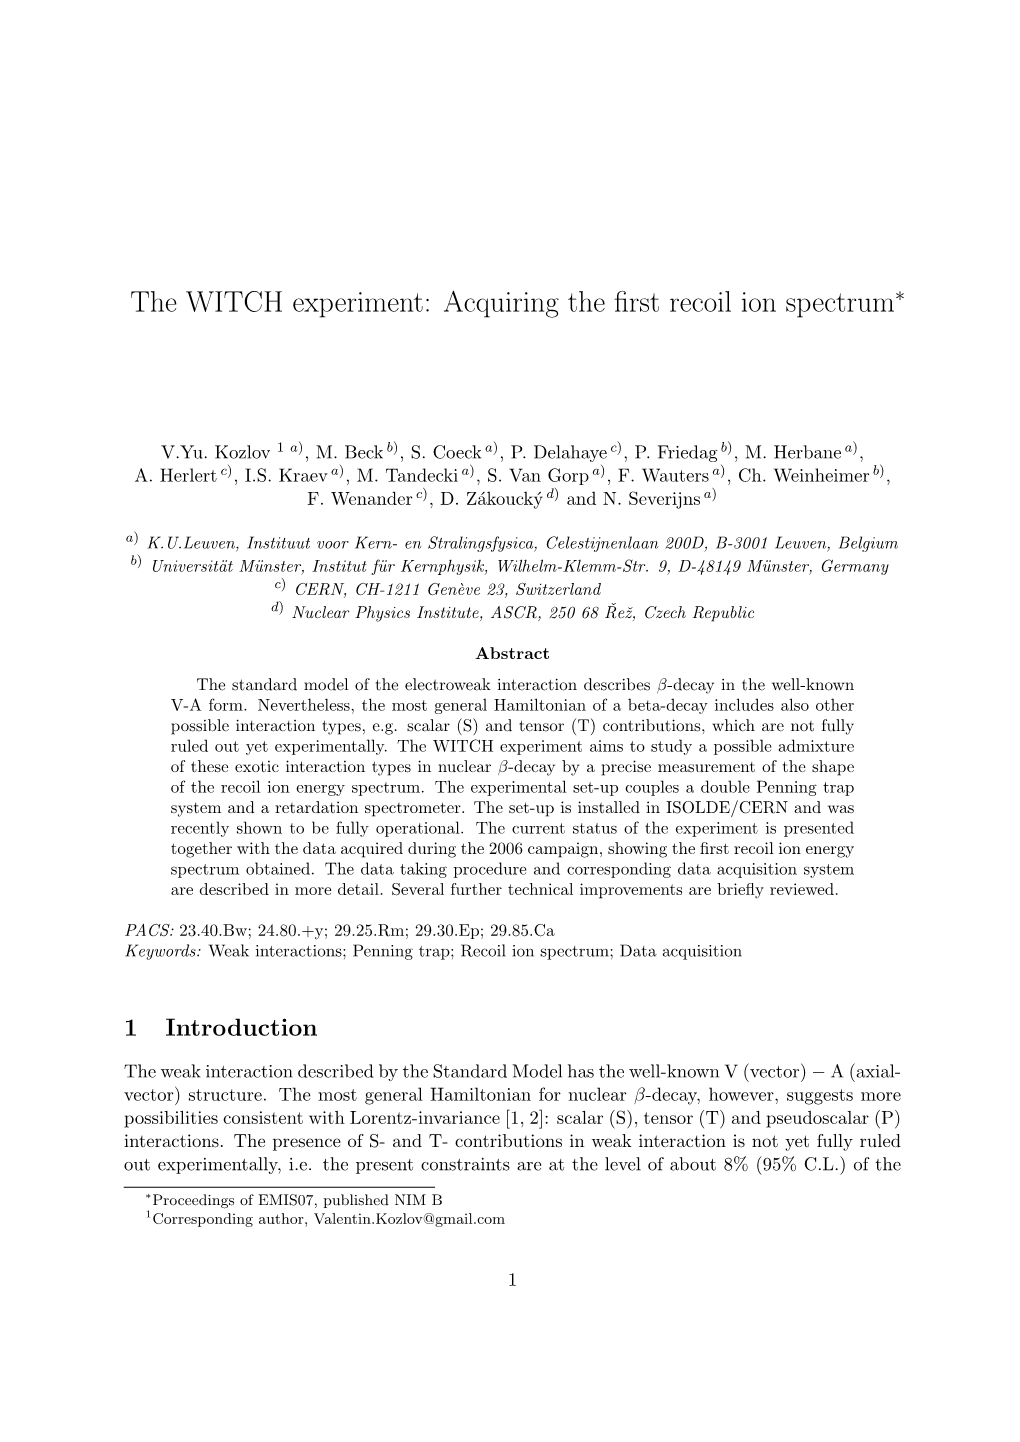 The WITCH Experiment: Acquiring the First Recoil Ion Spectrum